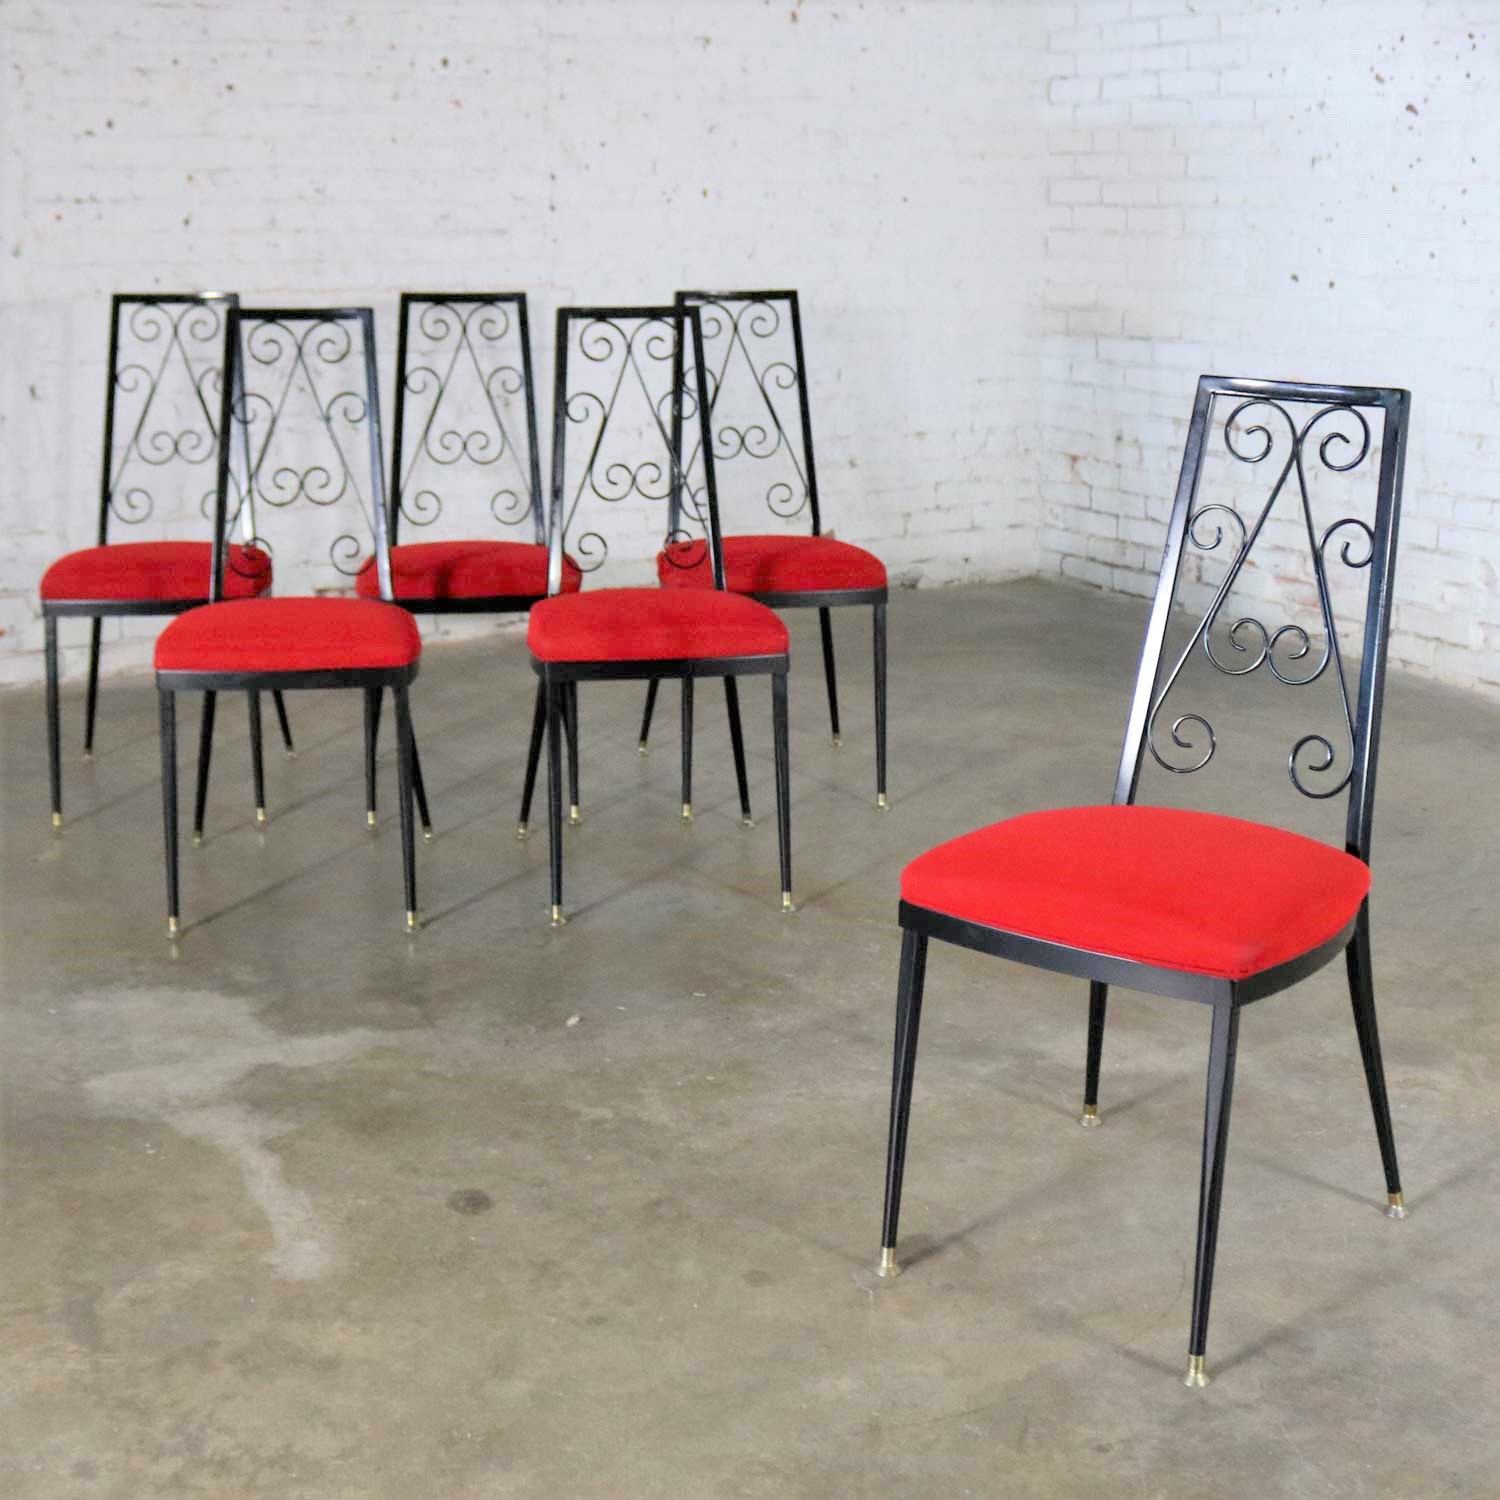 Set 6 Decorables 1967 Selection for Chromcraft Metal Dining Chairs Red and Black